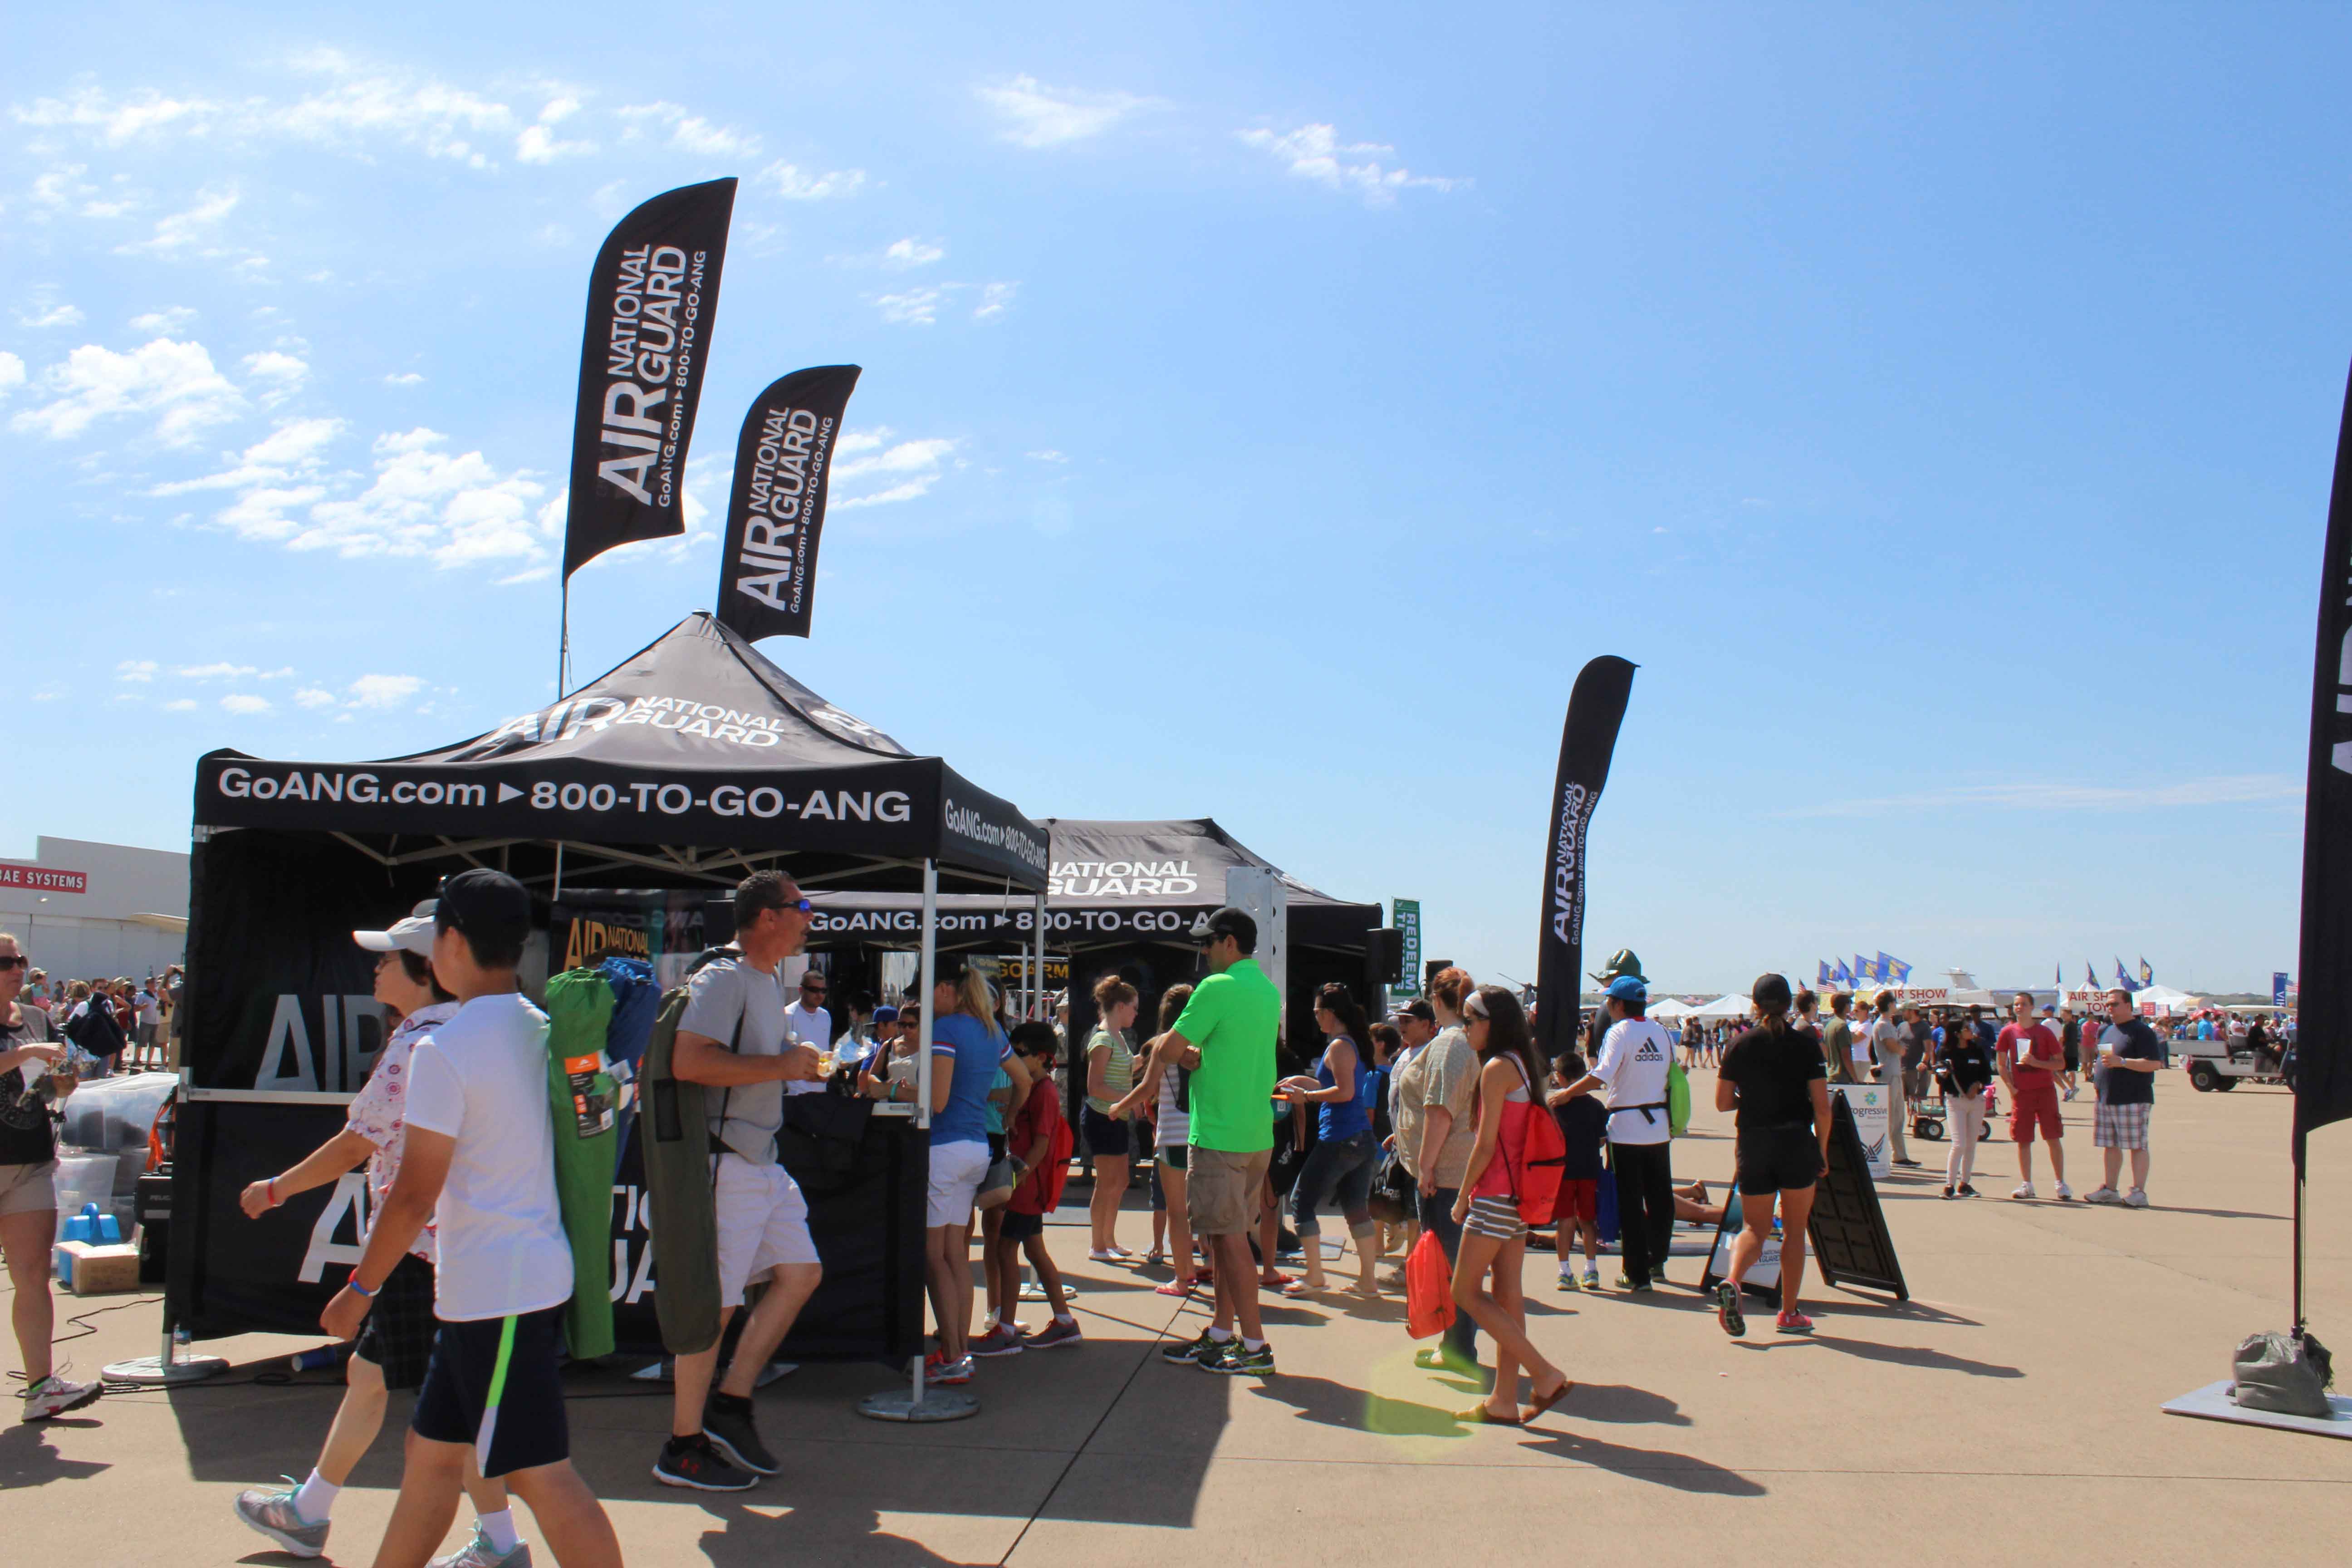 people around an Air National Guard exhibit with black branded tents at an air show on clear, blue sky day